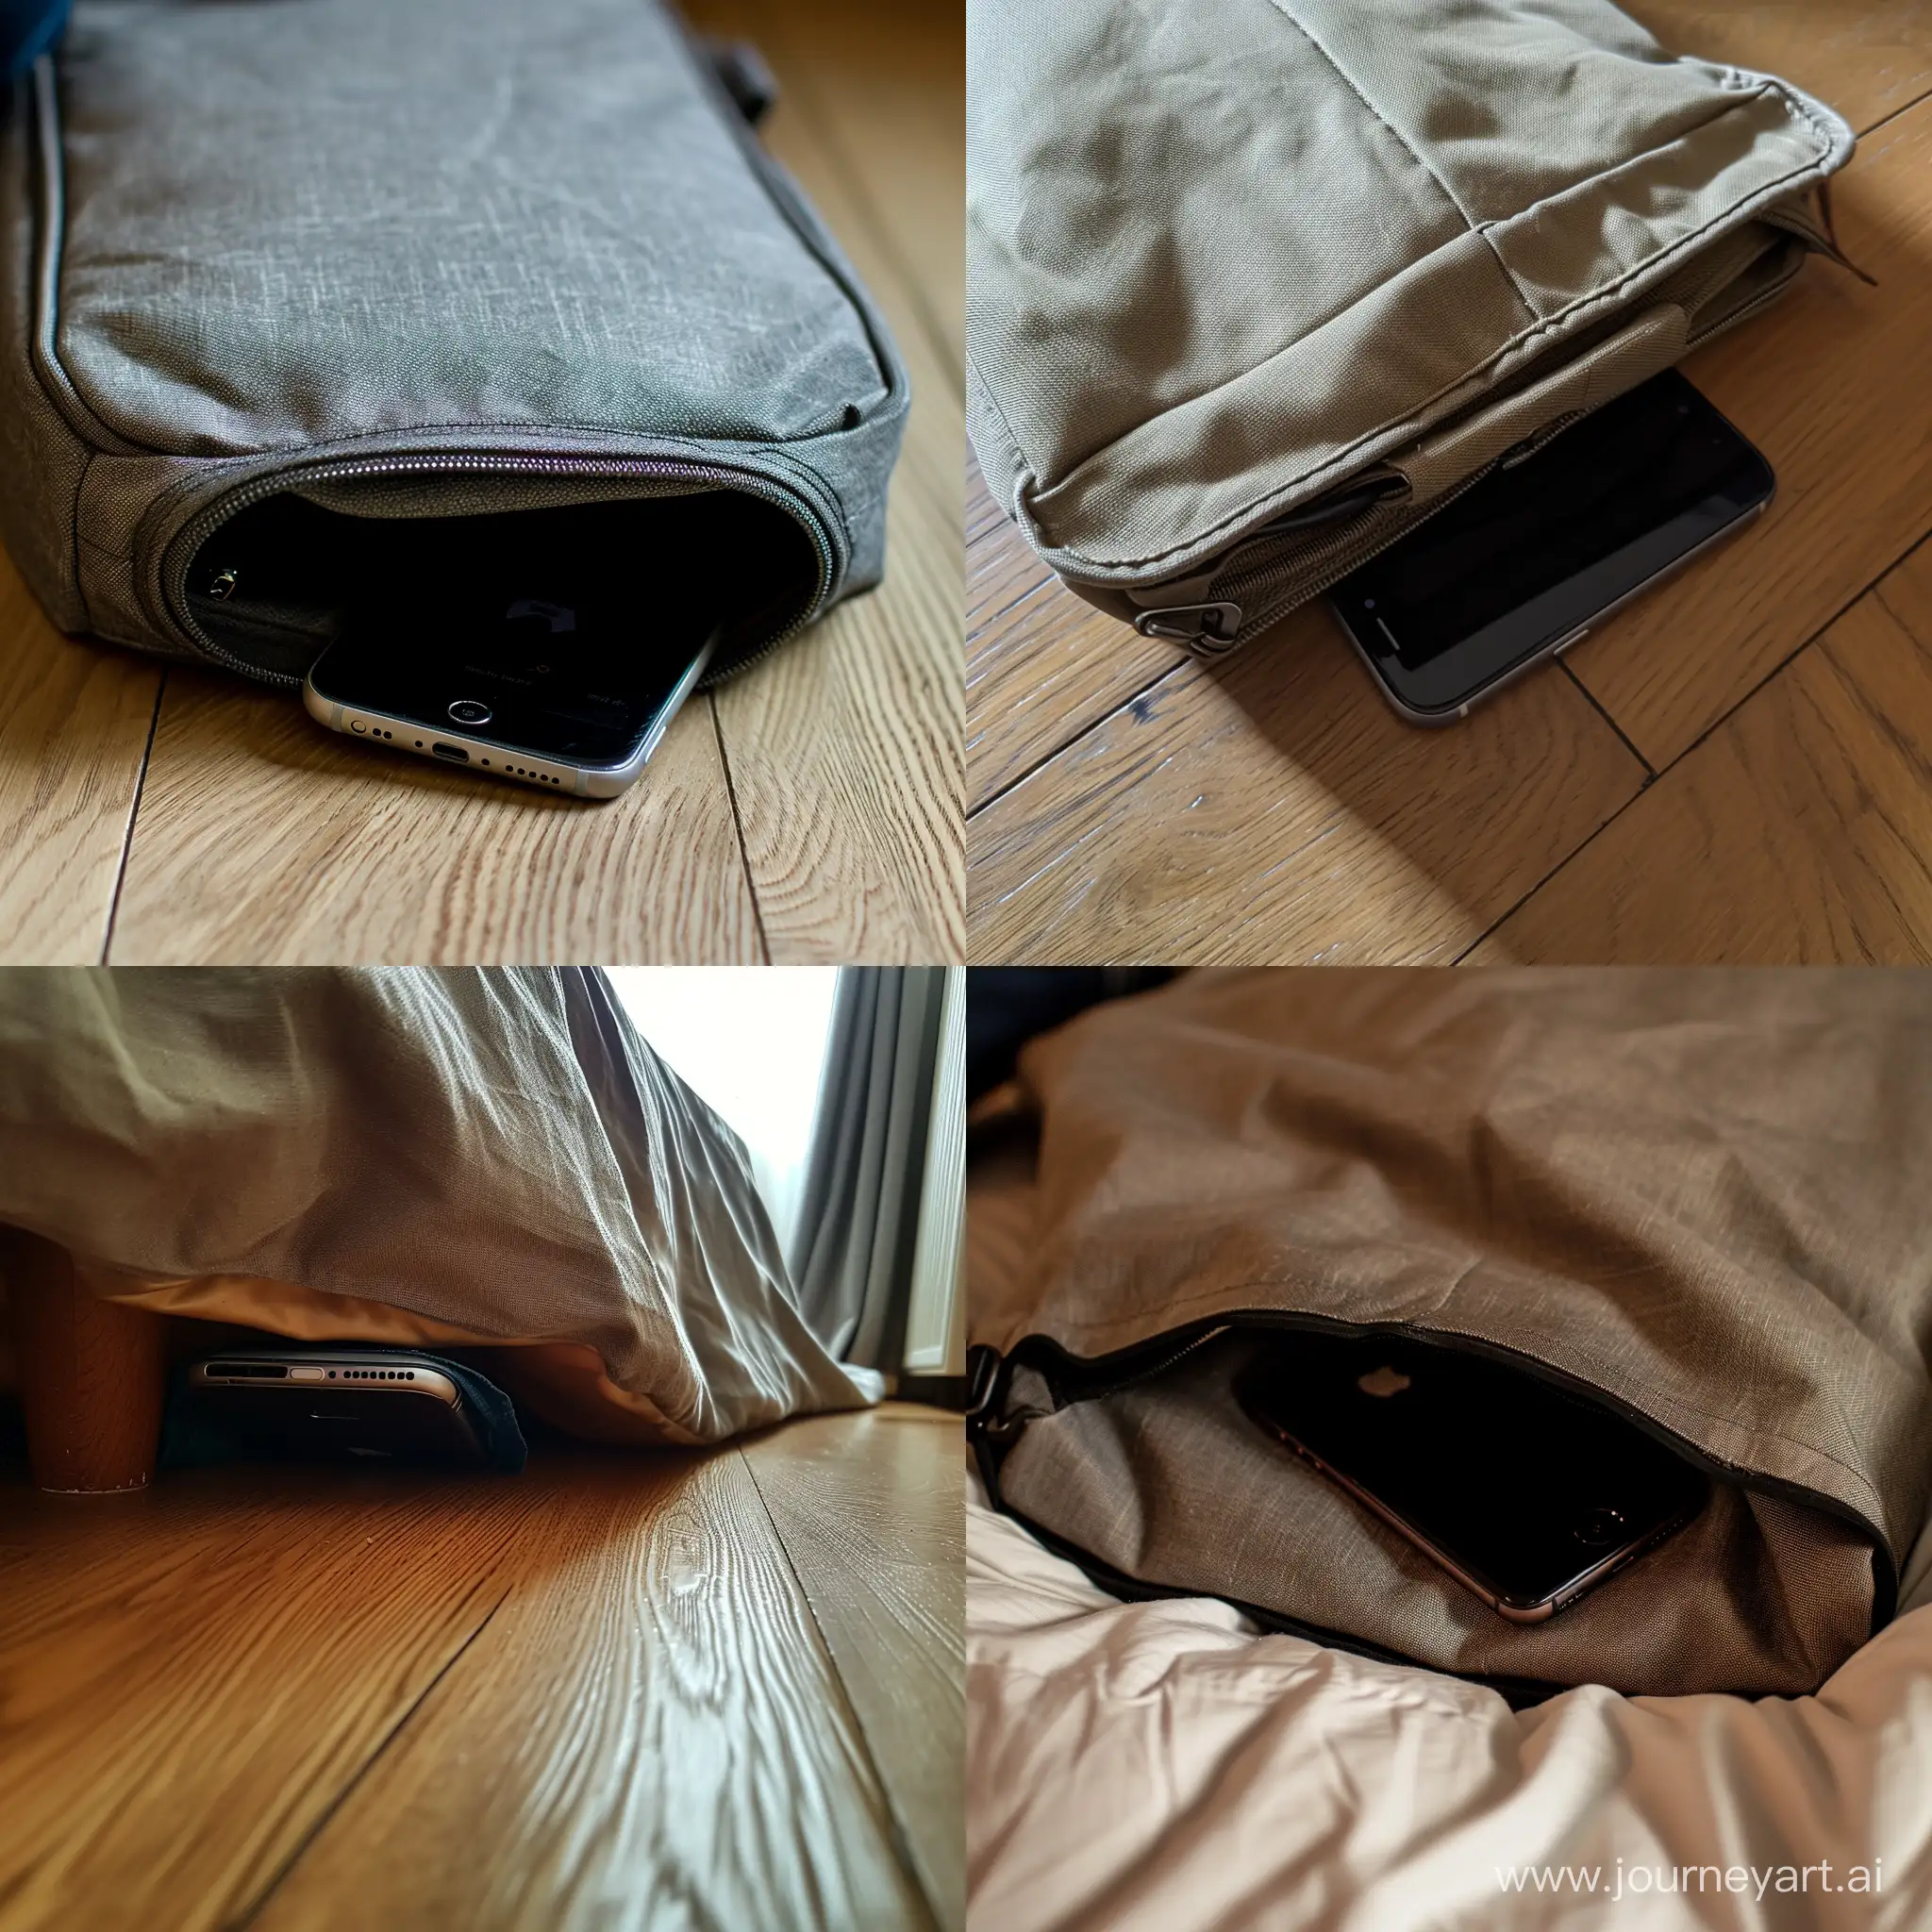 Phone-Hidden-Under-Bag-with-Unique-Visual-Perspective